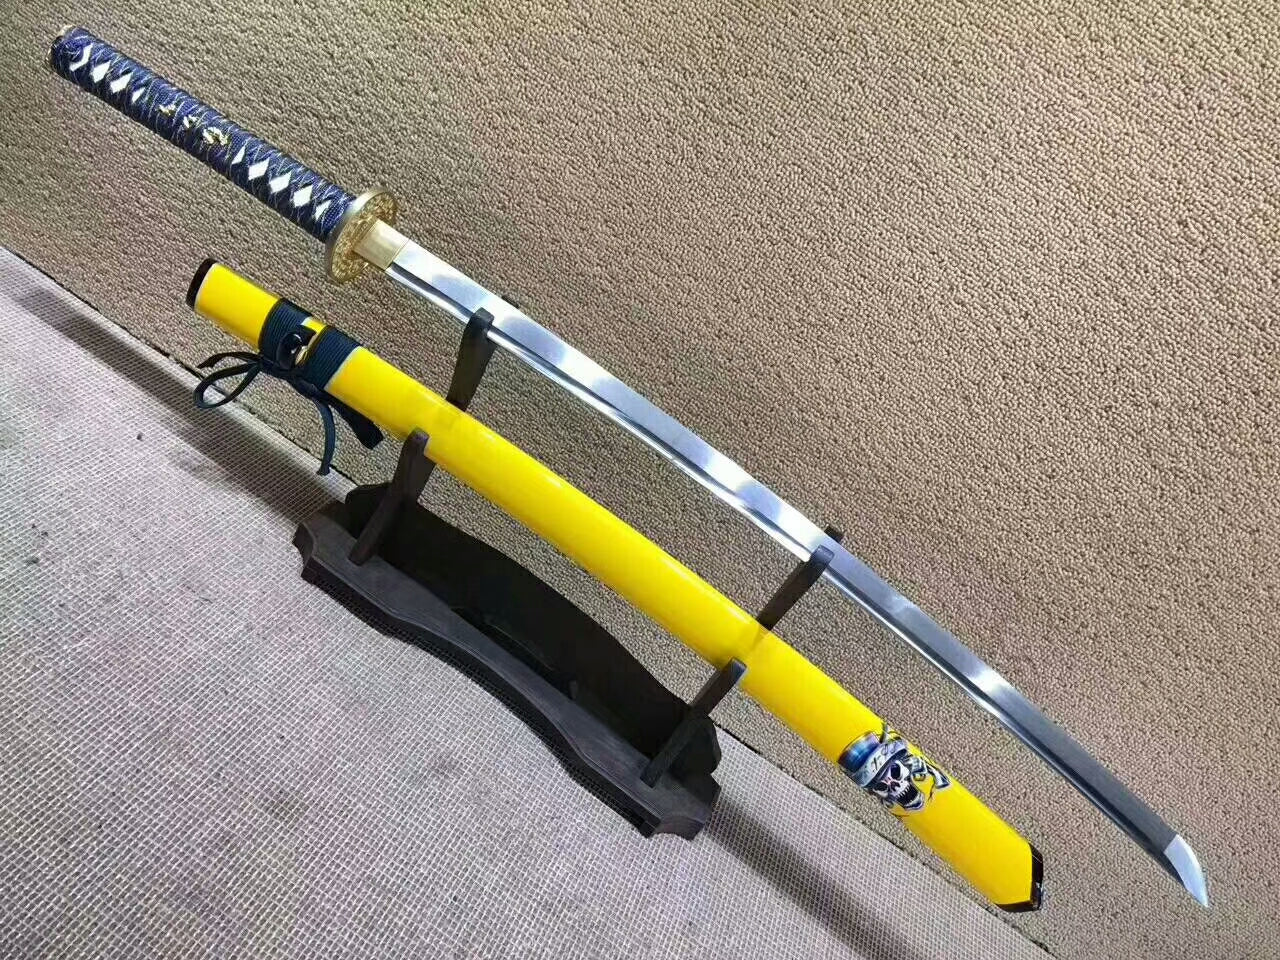 katana(High manganese steel,Yellow scabbard,Alloy fitted)Full tang,Length 39" - Chinese sword shop